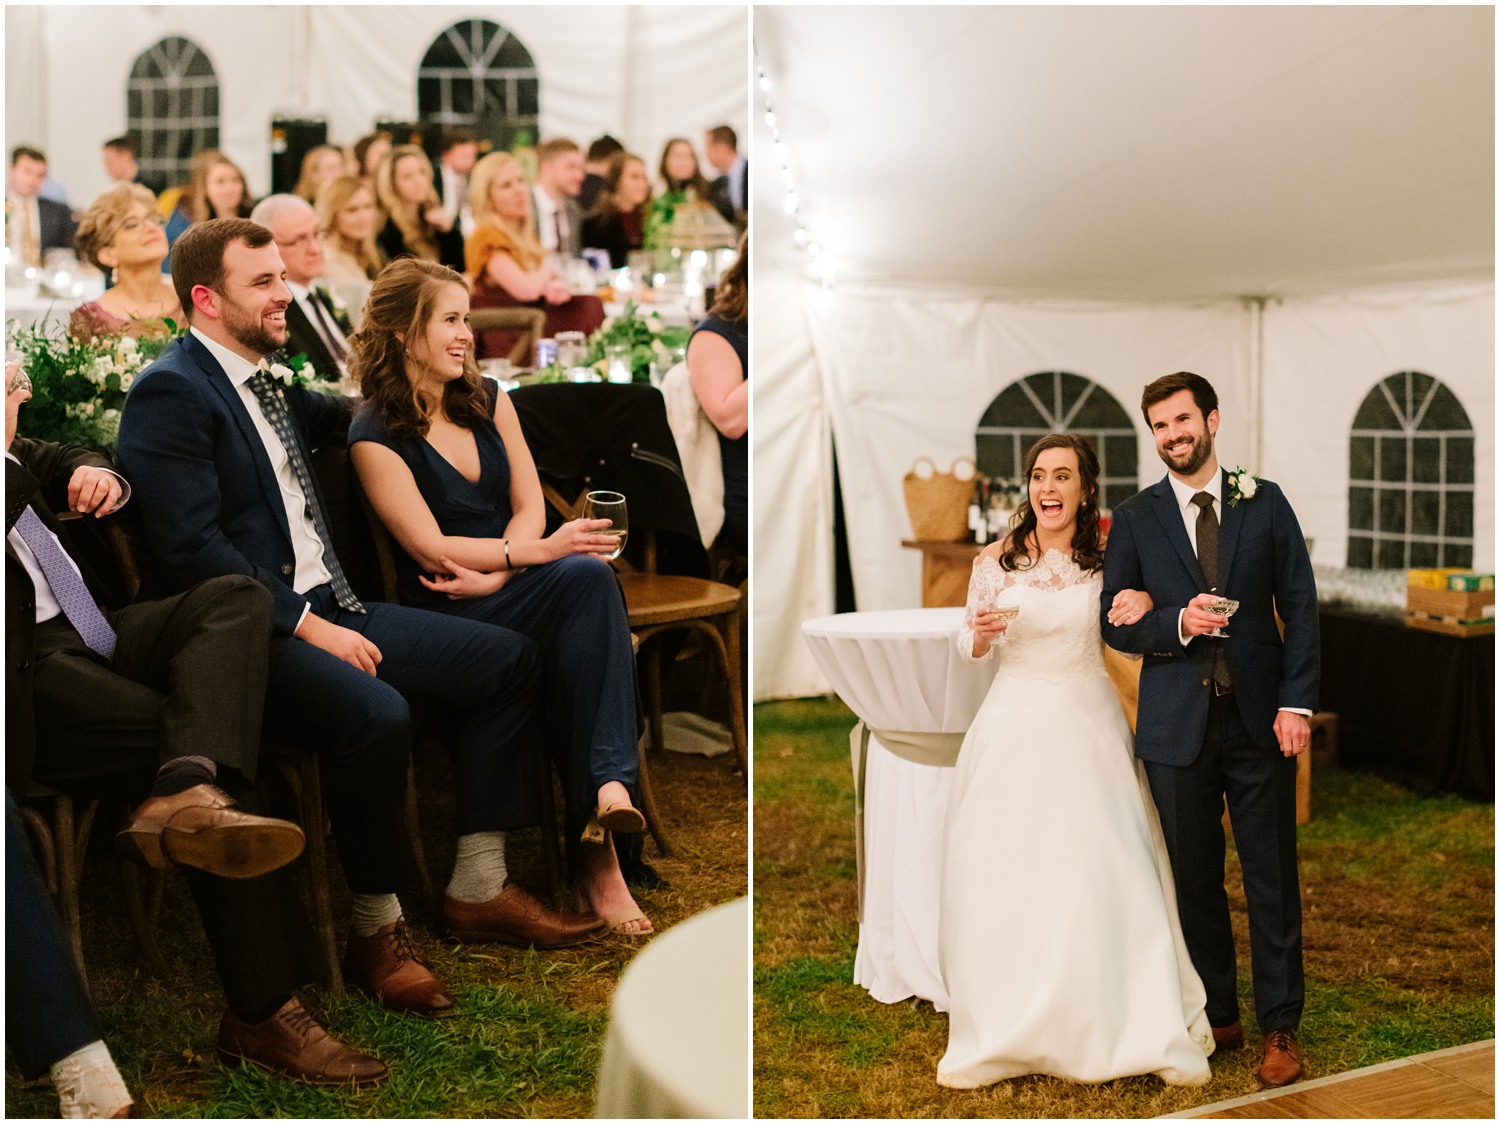 newlyweds thank guests for attending wedding during reception under tent